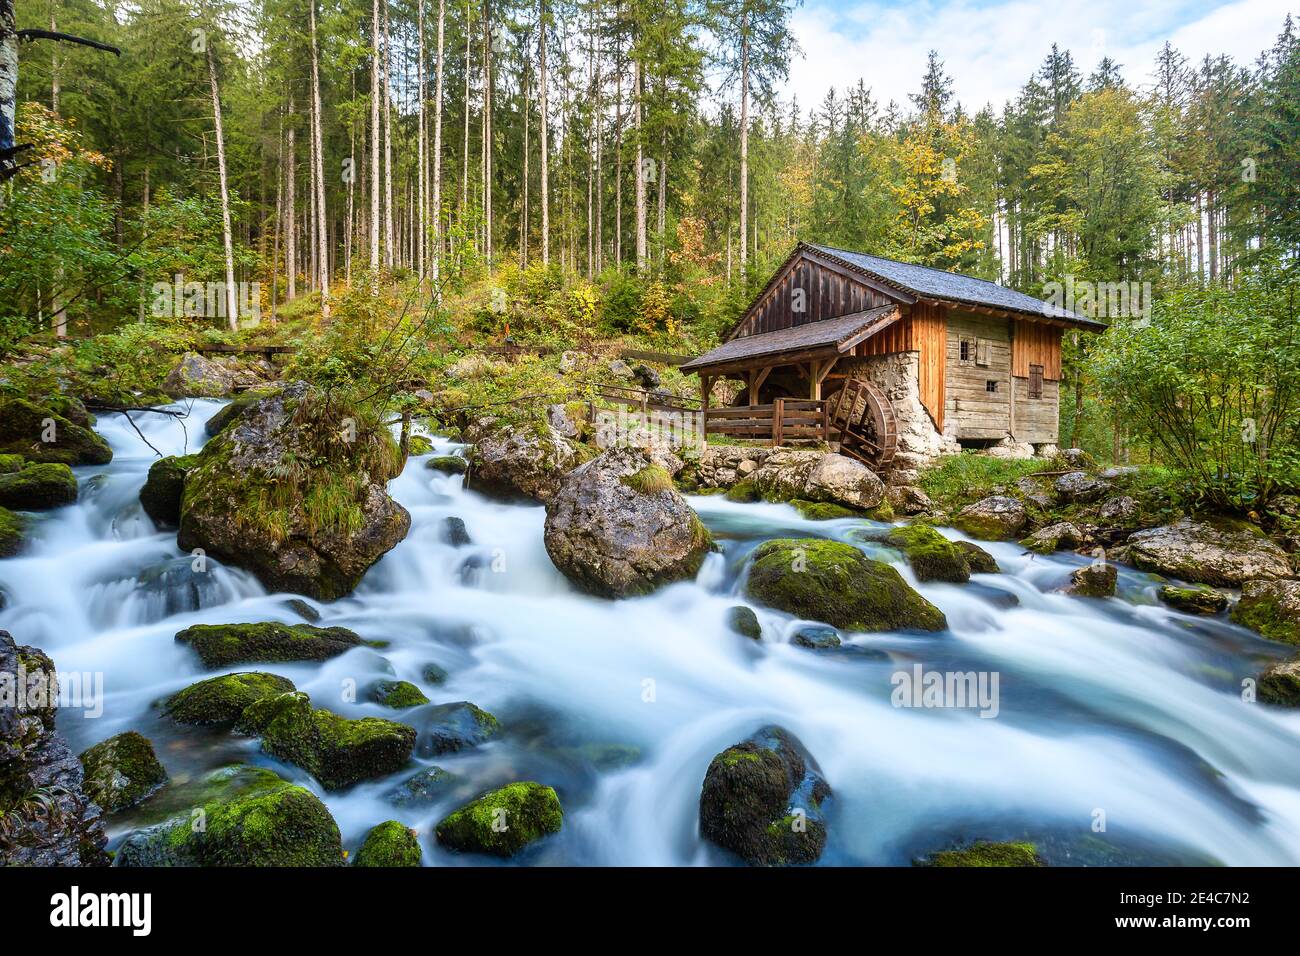 The Gollinger Mill at the Gollinger Waterfall in Golling, Austria Stock Photo